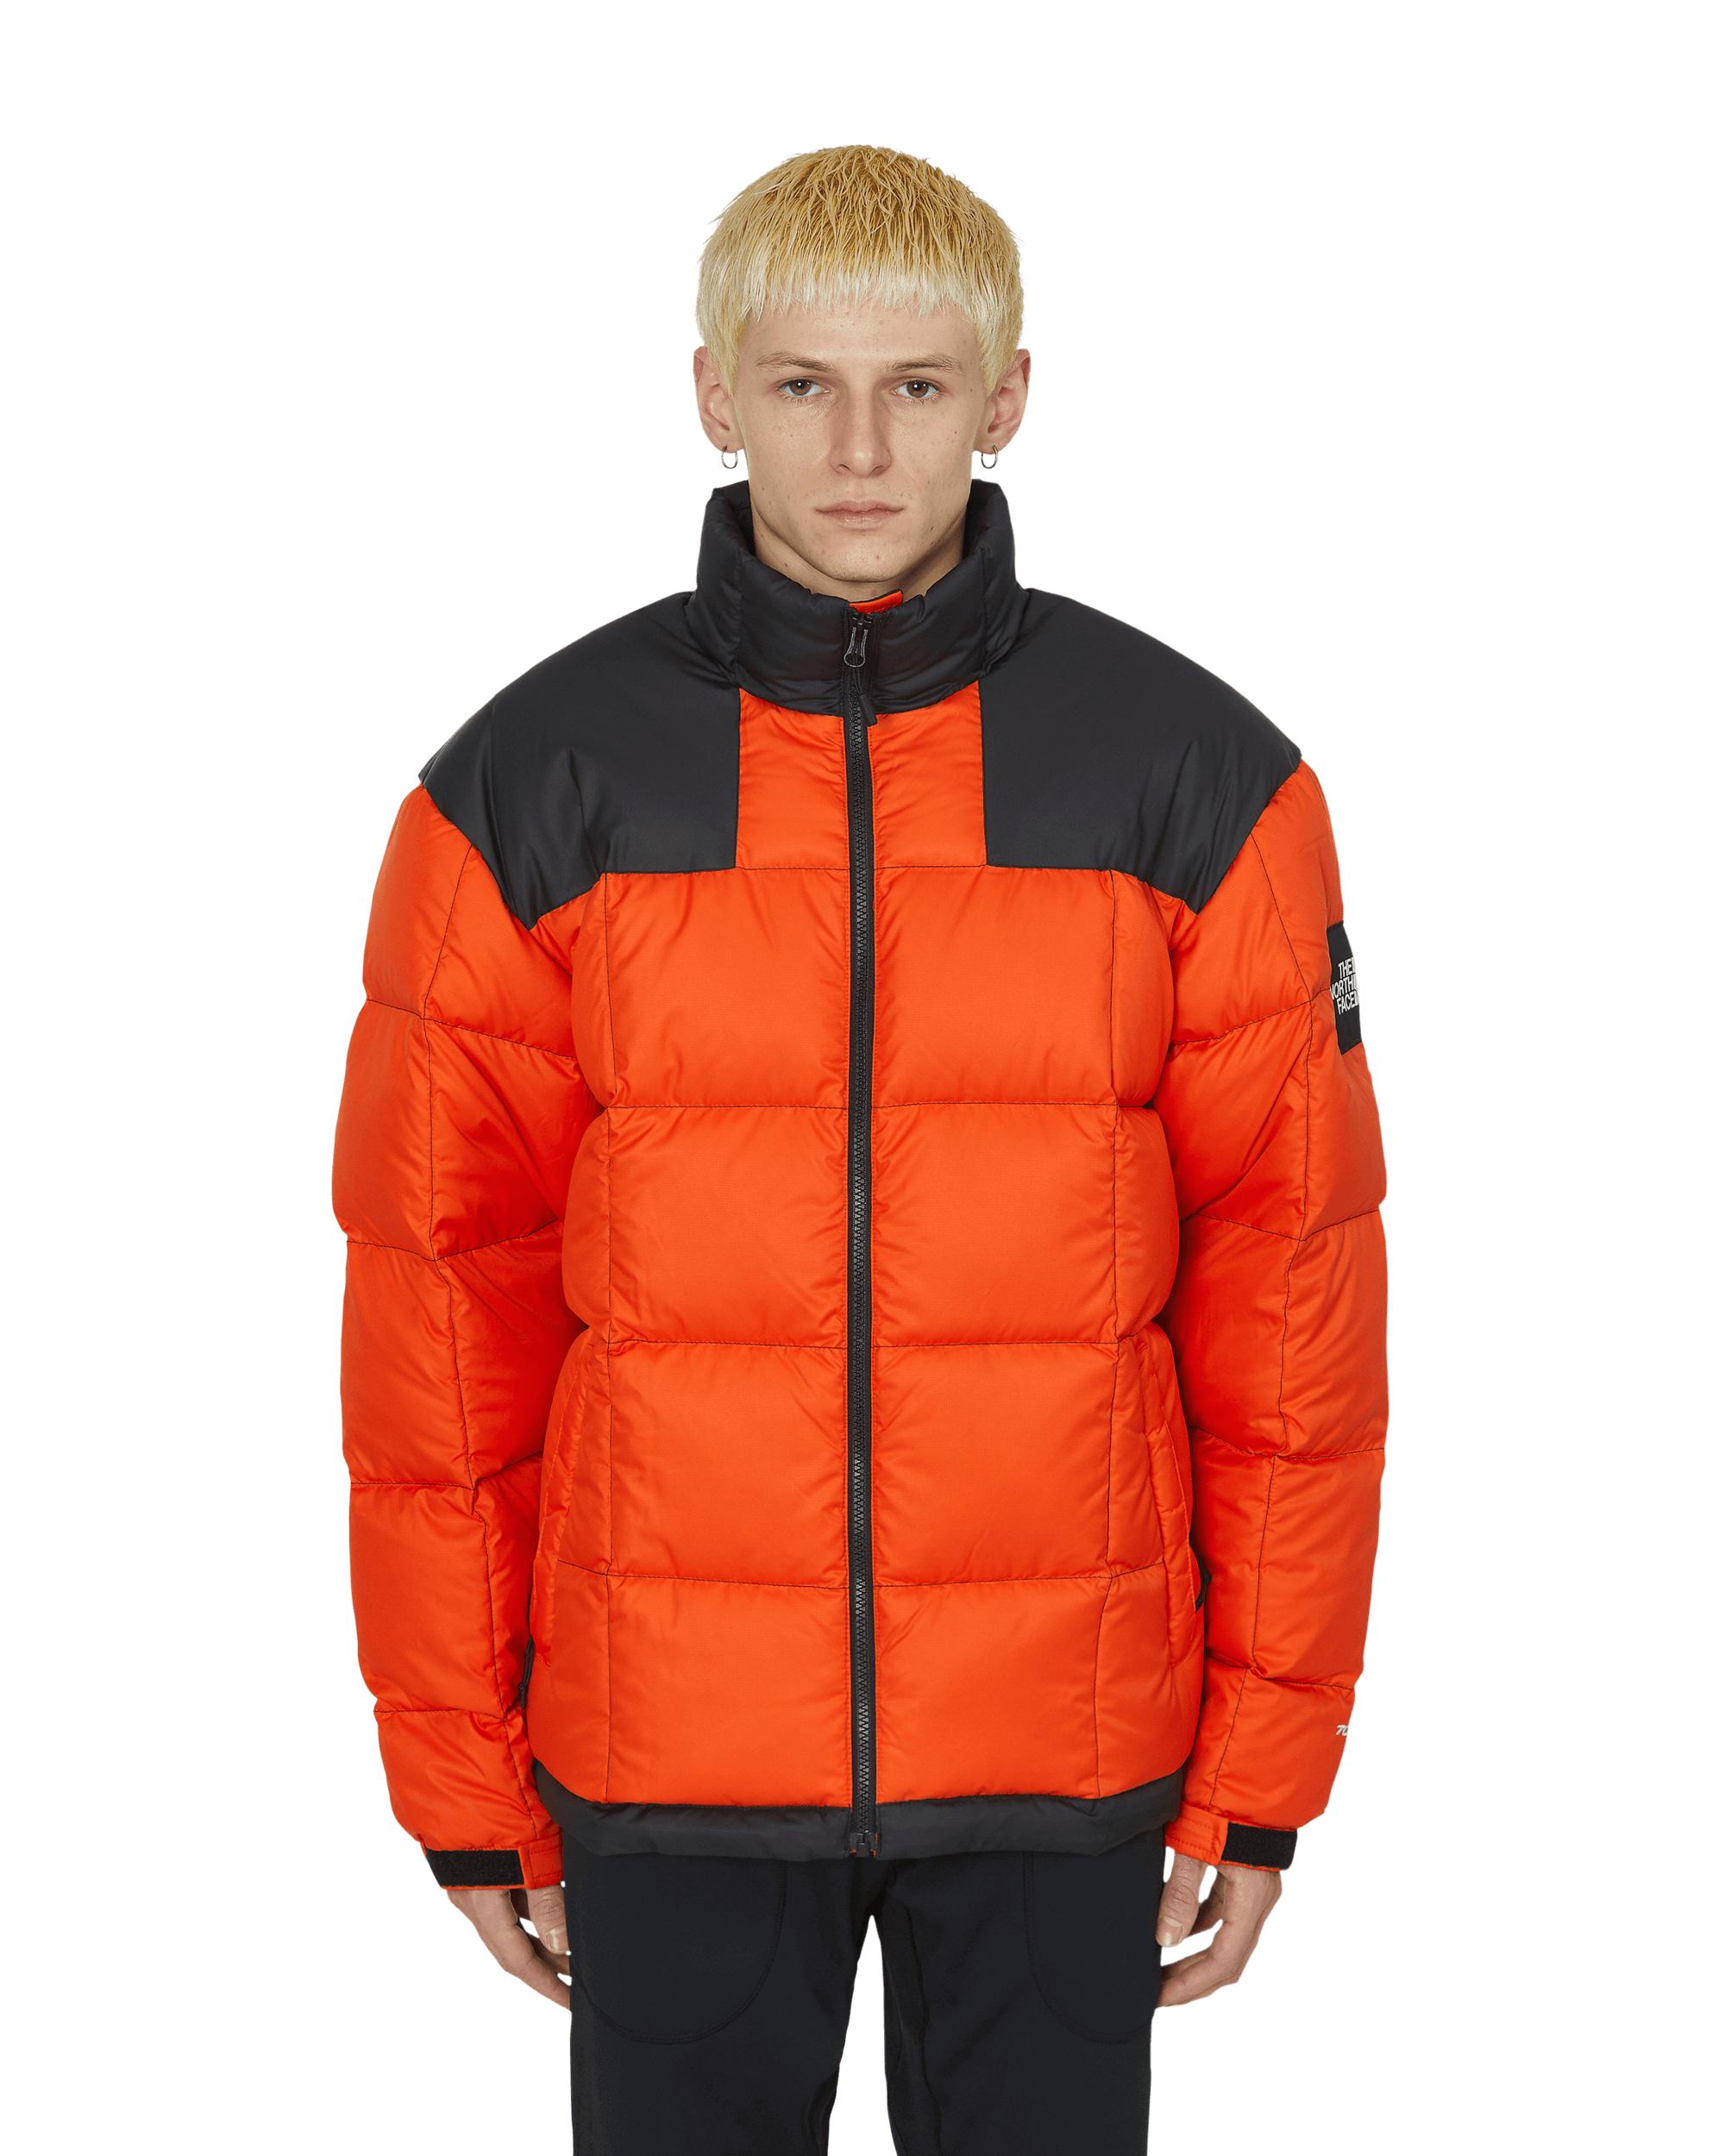 The North Face Lhotse Down Jacket in Orange for Men - Lyst